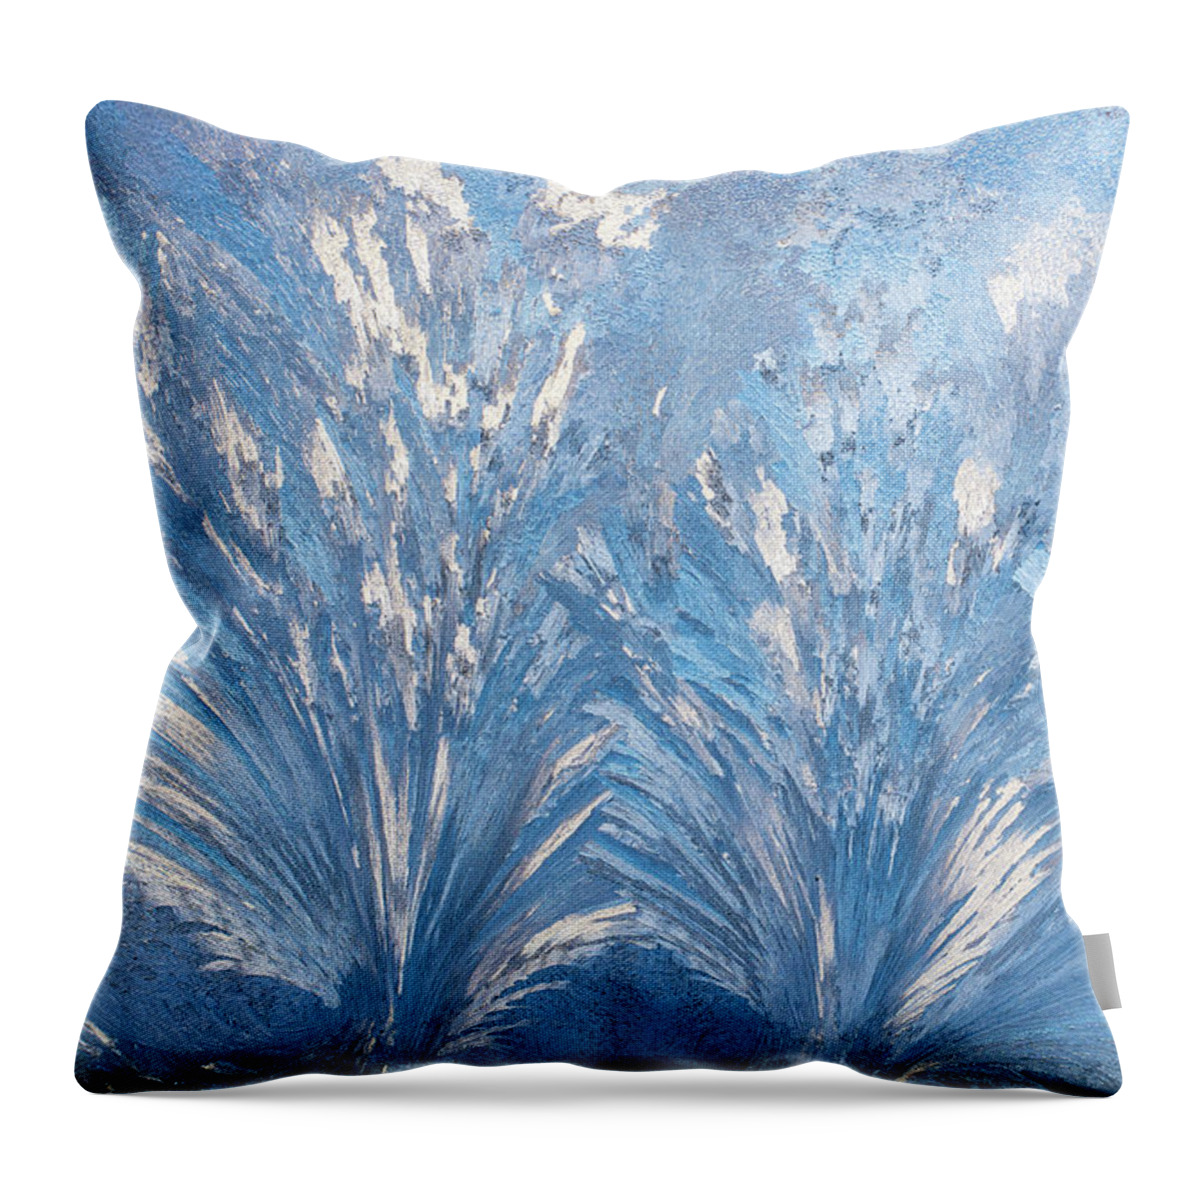 Cheryl Baxter Photography Throw Pillow featuring the photograph Window Frost Waves by Cheryl Baxter